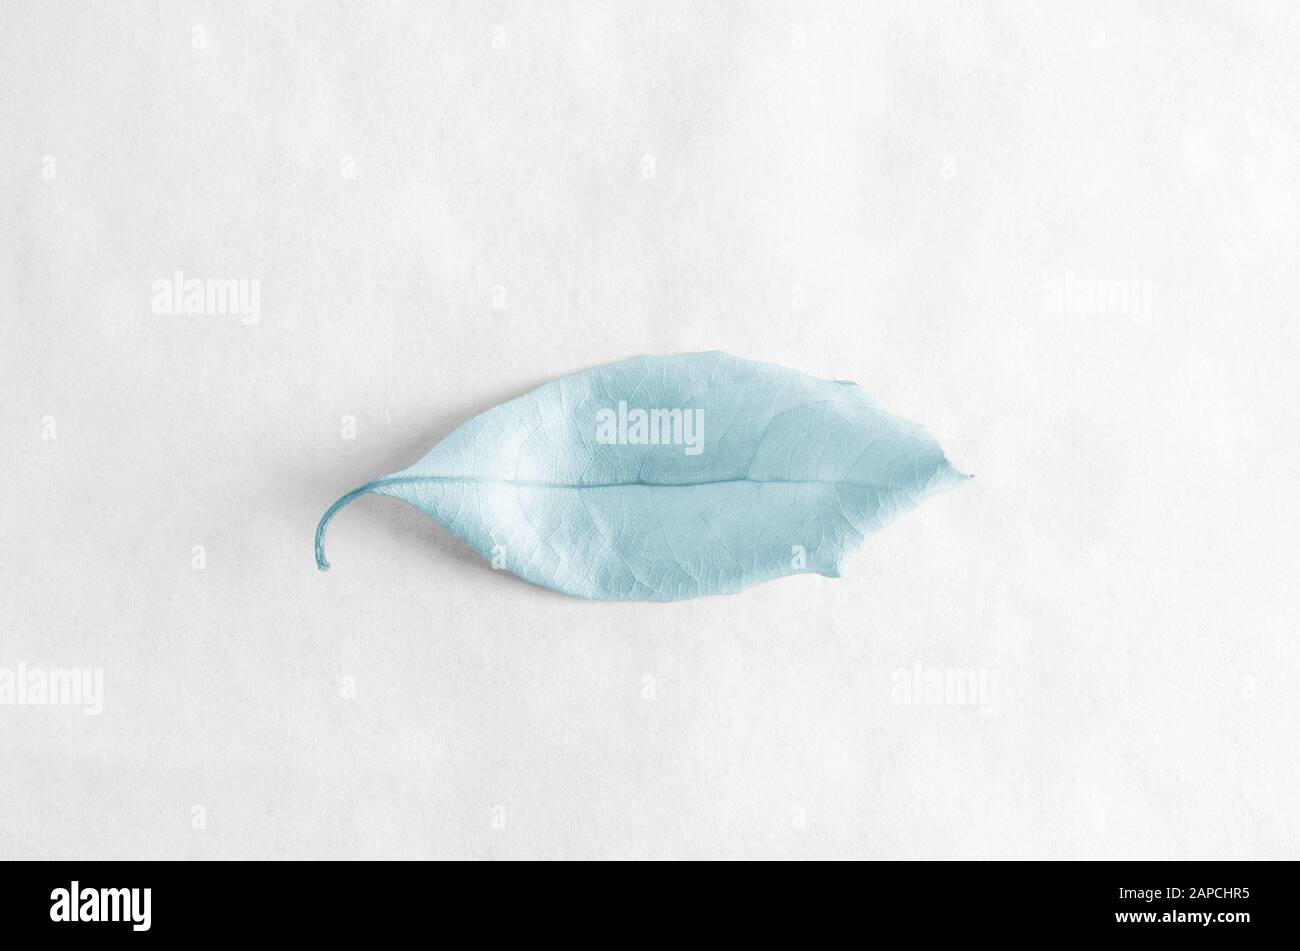 A single pale blue tinted leaf on paper background. Stock Photo